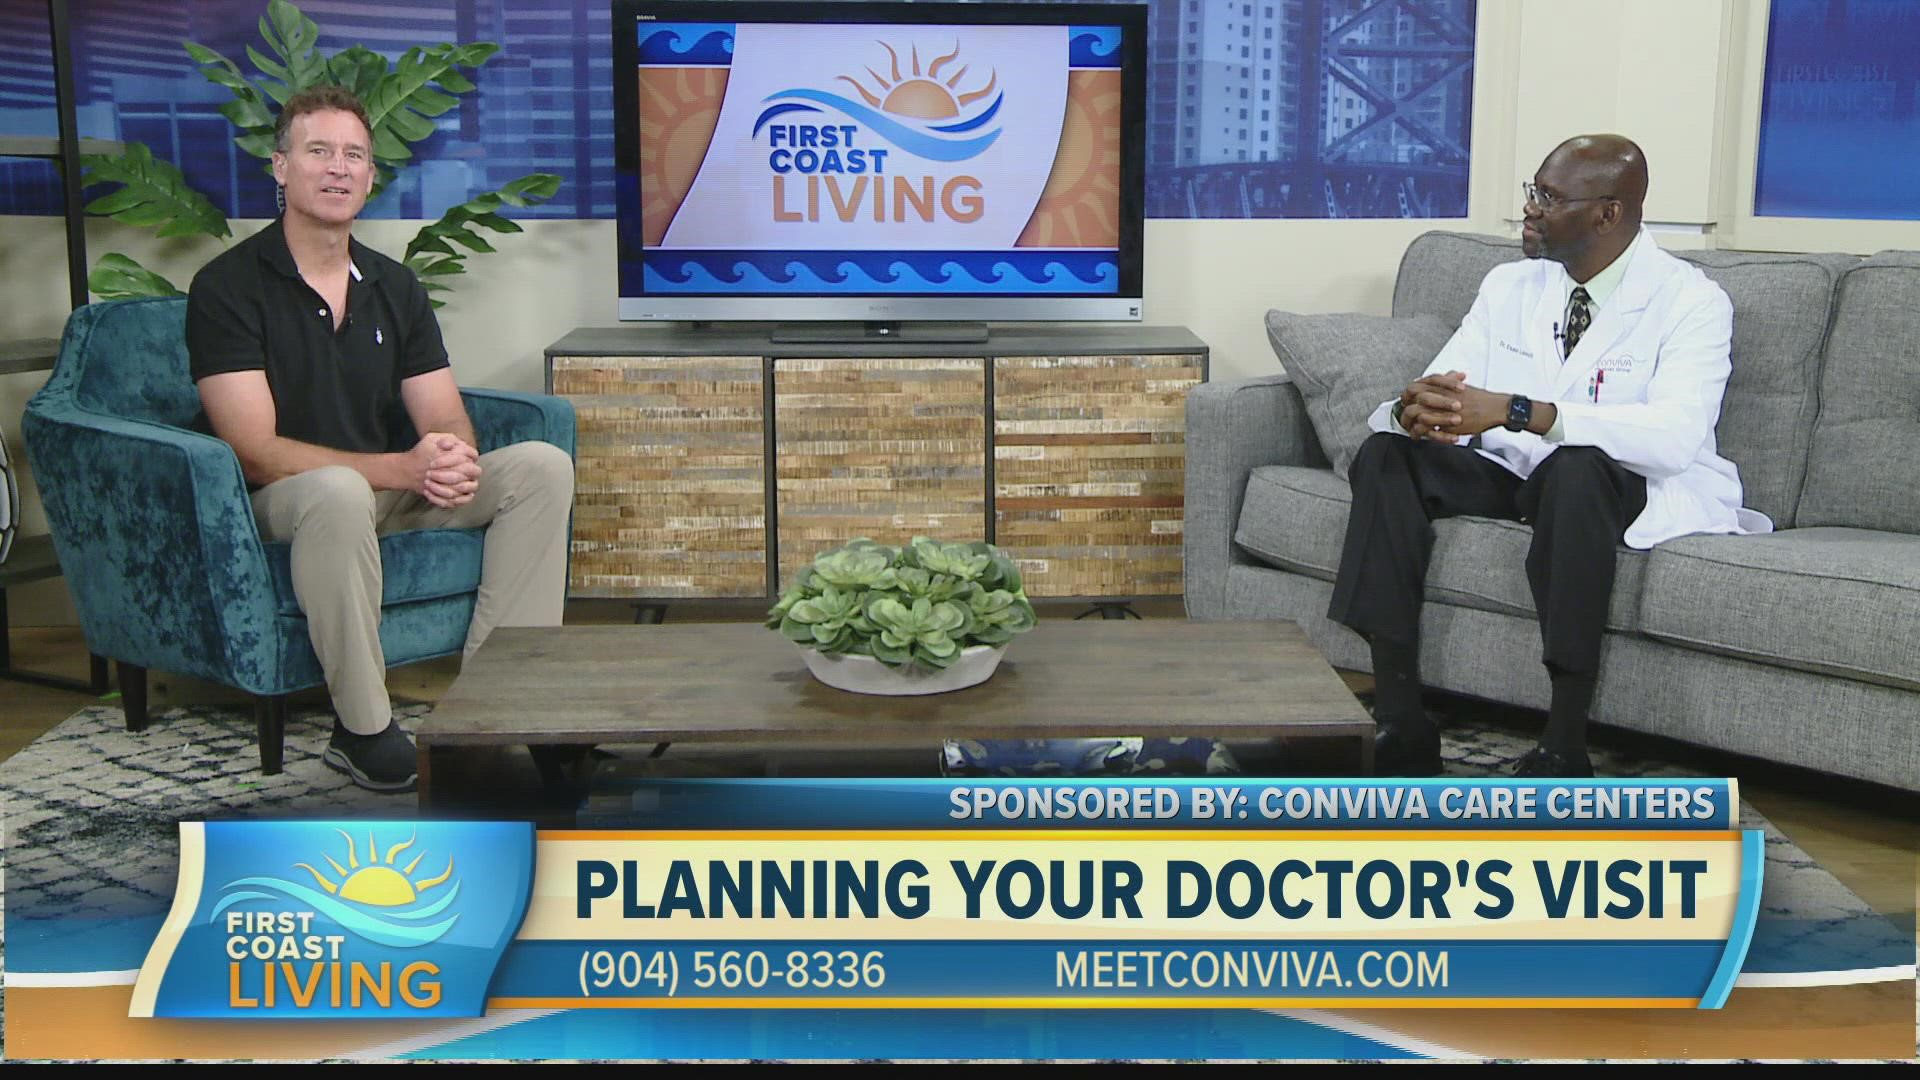 Dr. Esau Laurencin from Conviva Care Center goes over what you need to do BEFORE, DURING AND AFTER an appointment to make sure you're getting the CARE you need.